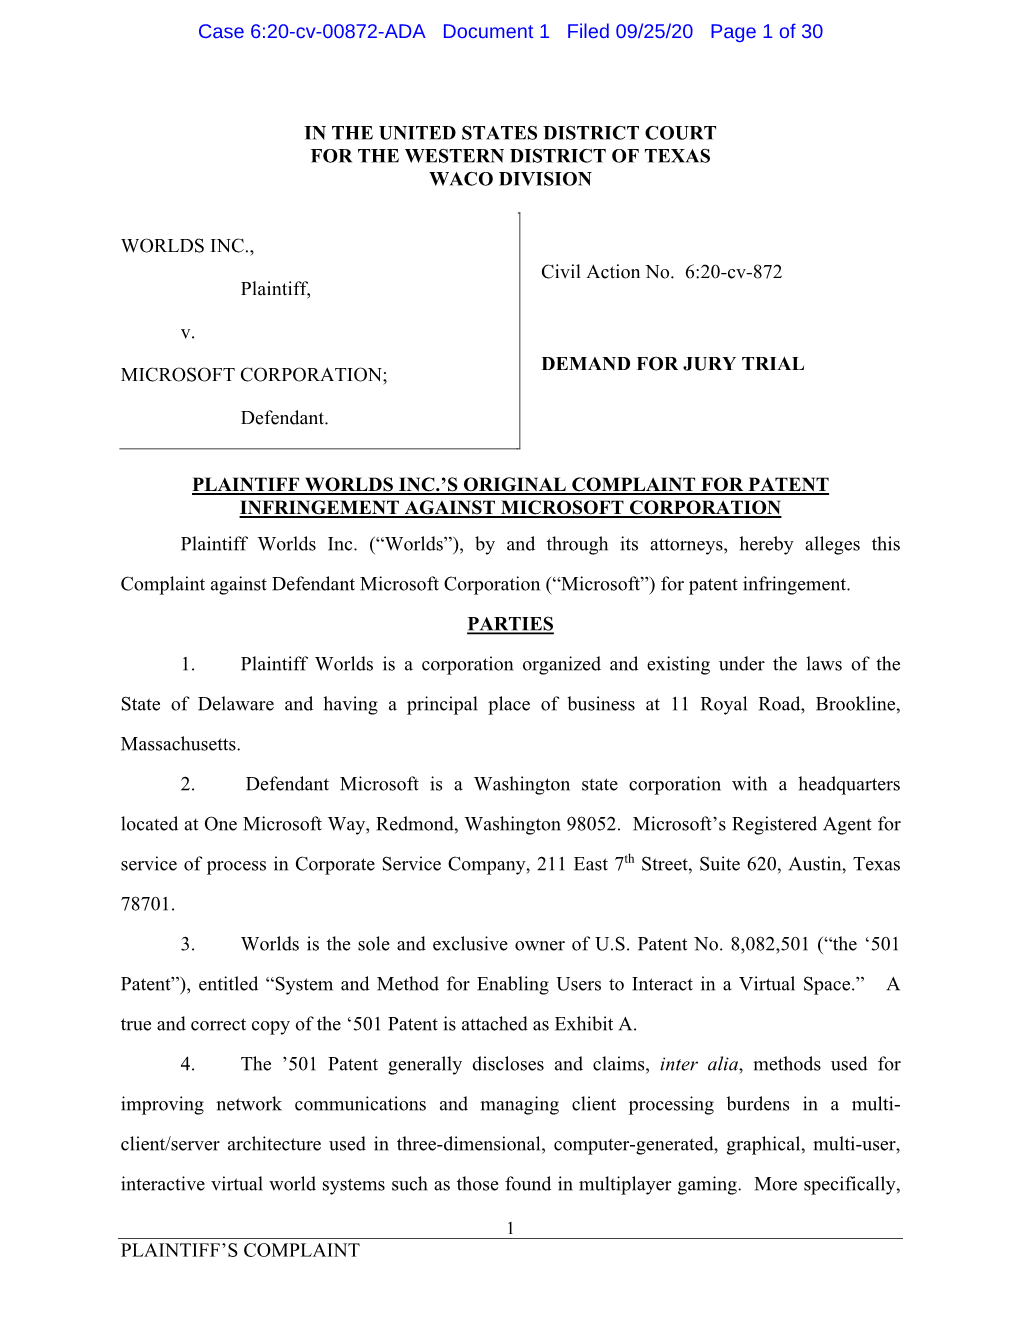 Plaintiff's Complaint in the United States District